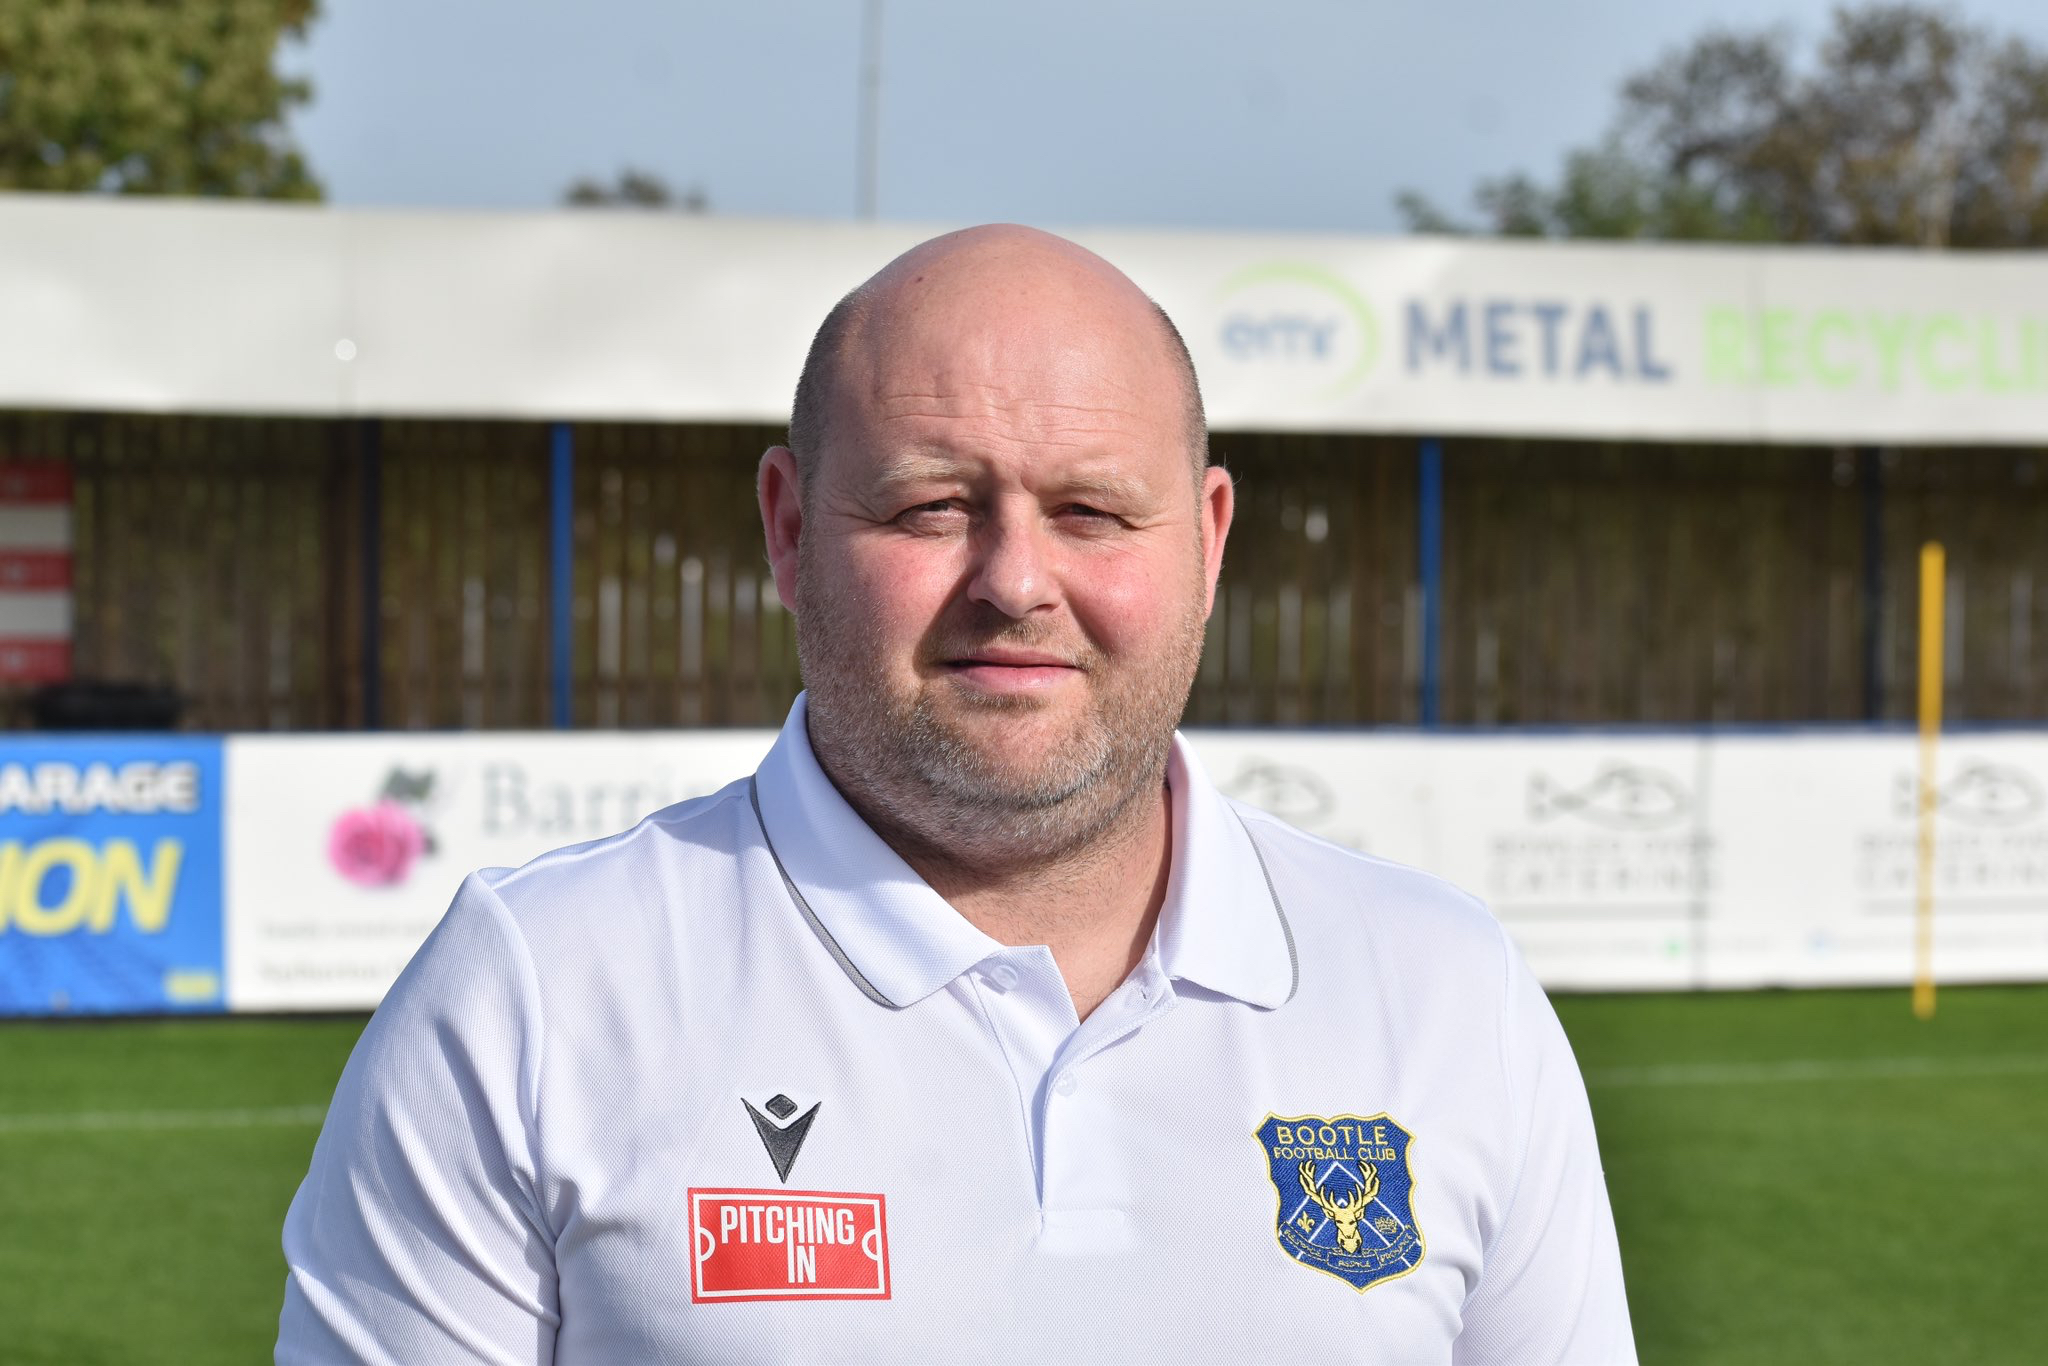 Bootle manager Mick McGraa